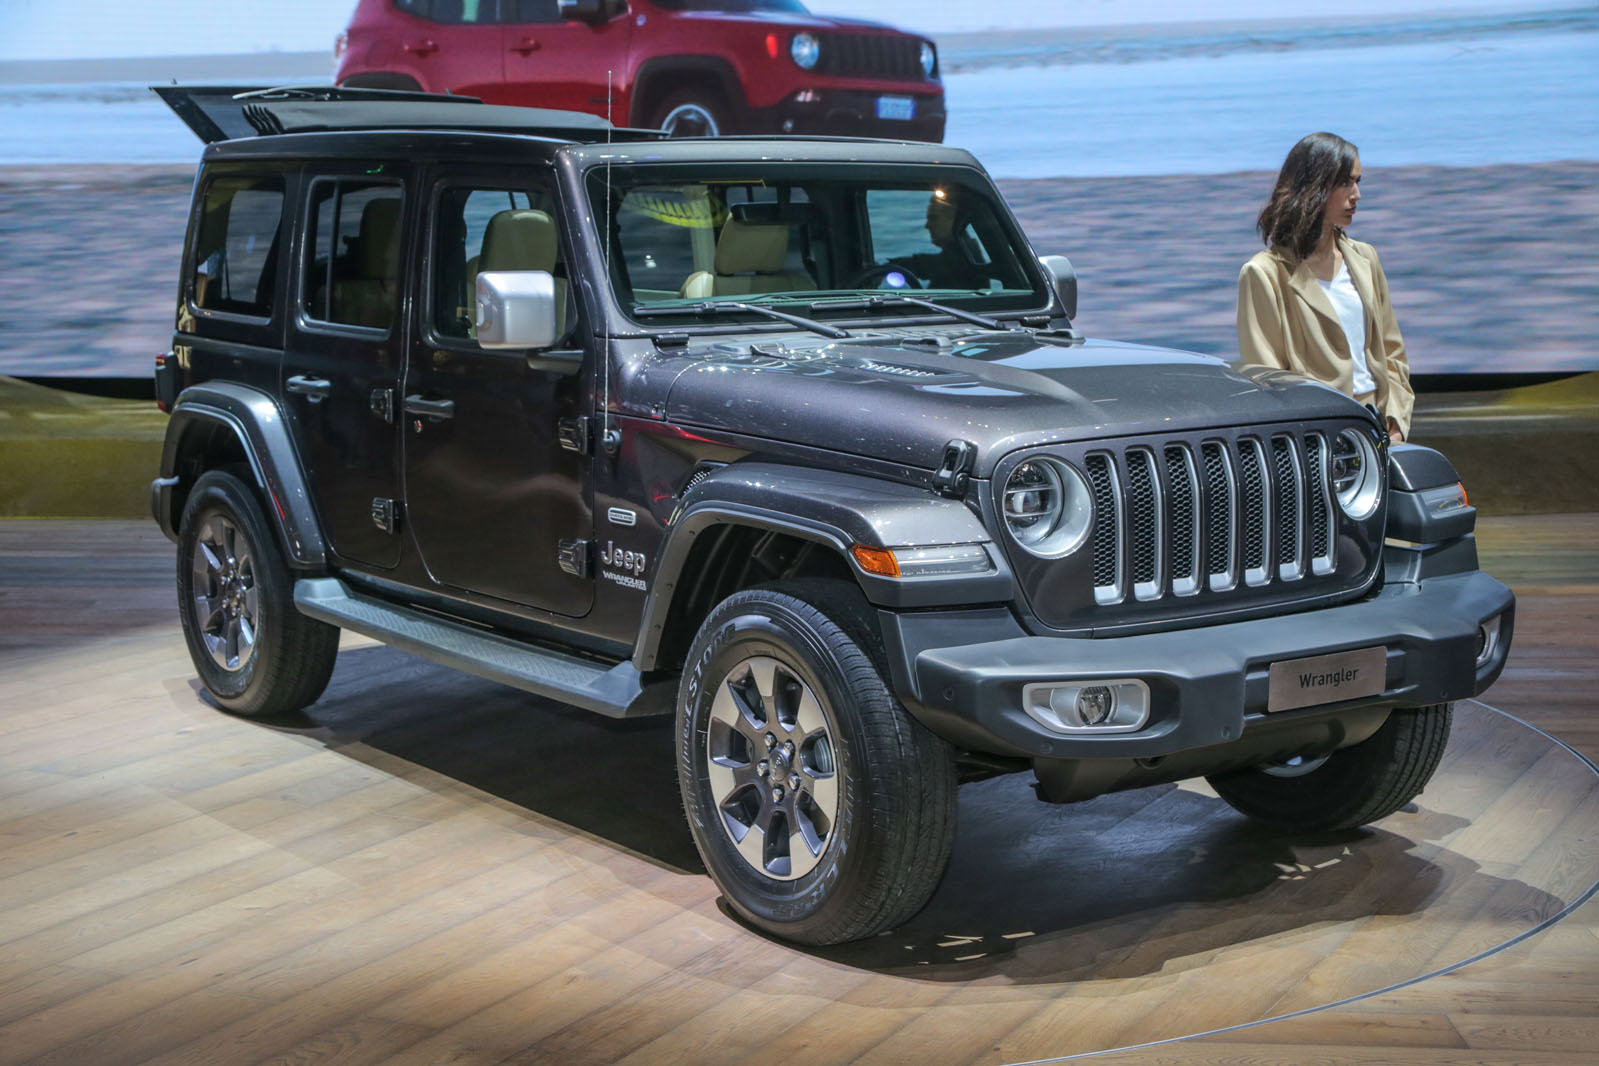 New Jeep Wrangler priced from £44,495 | Autocar